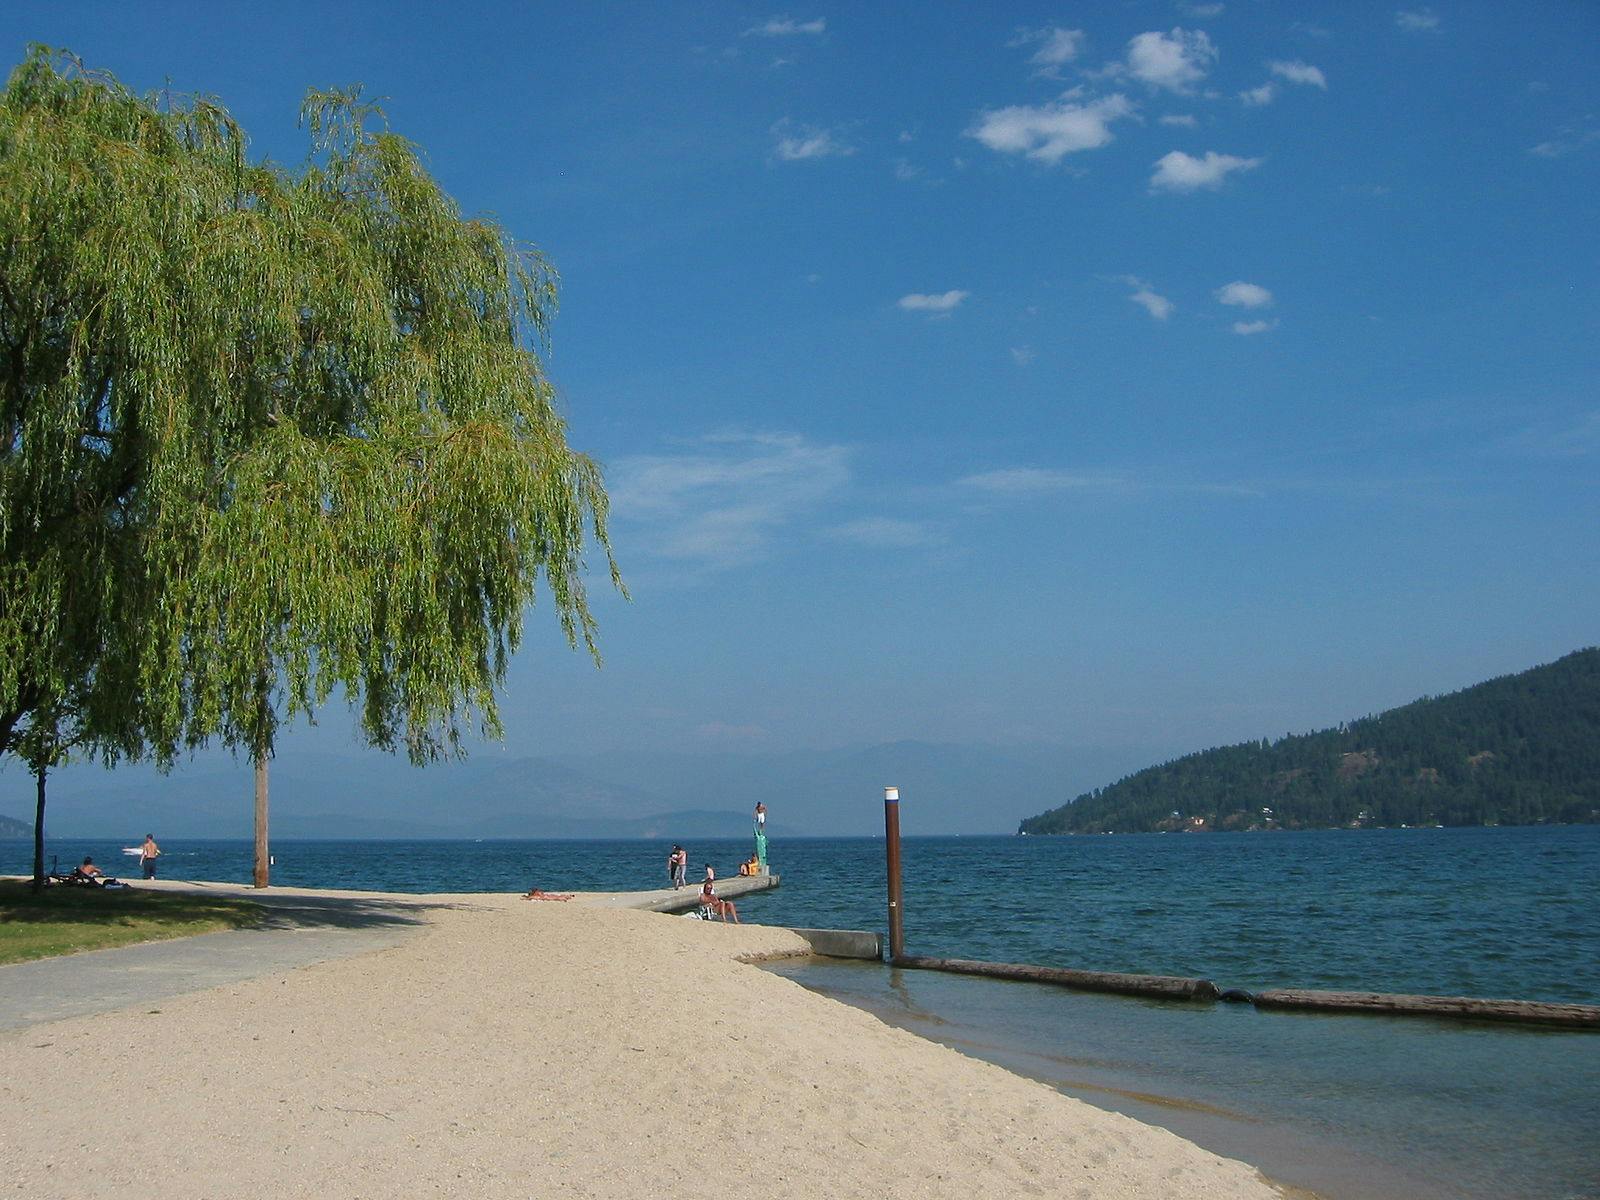 A beach on the lake. A giant willow shades part of the beach.